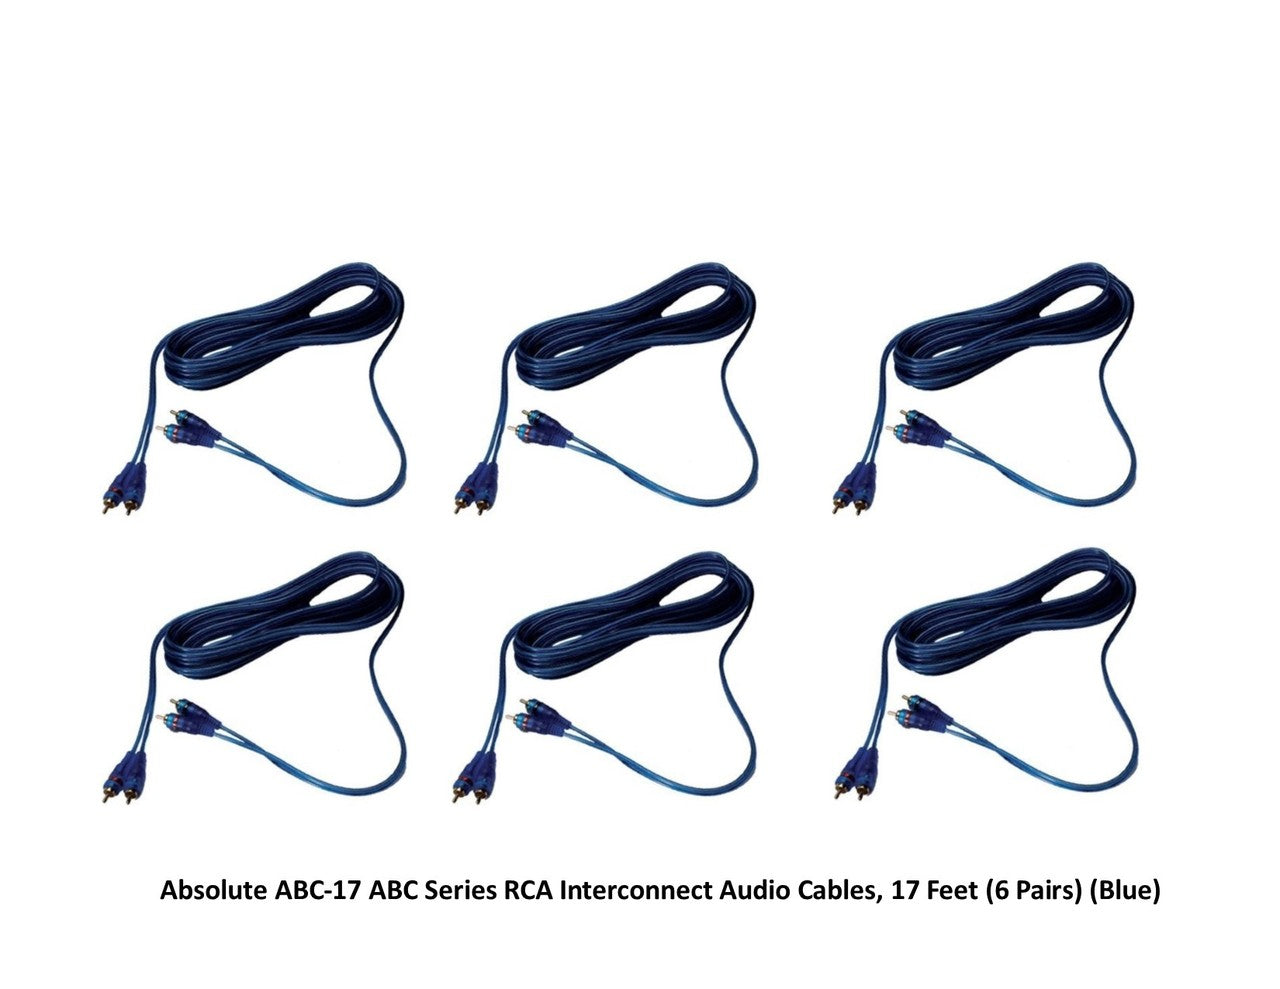 RCA Interconnect Audio Cables 17 Feet 6 Pair (Blue)